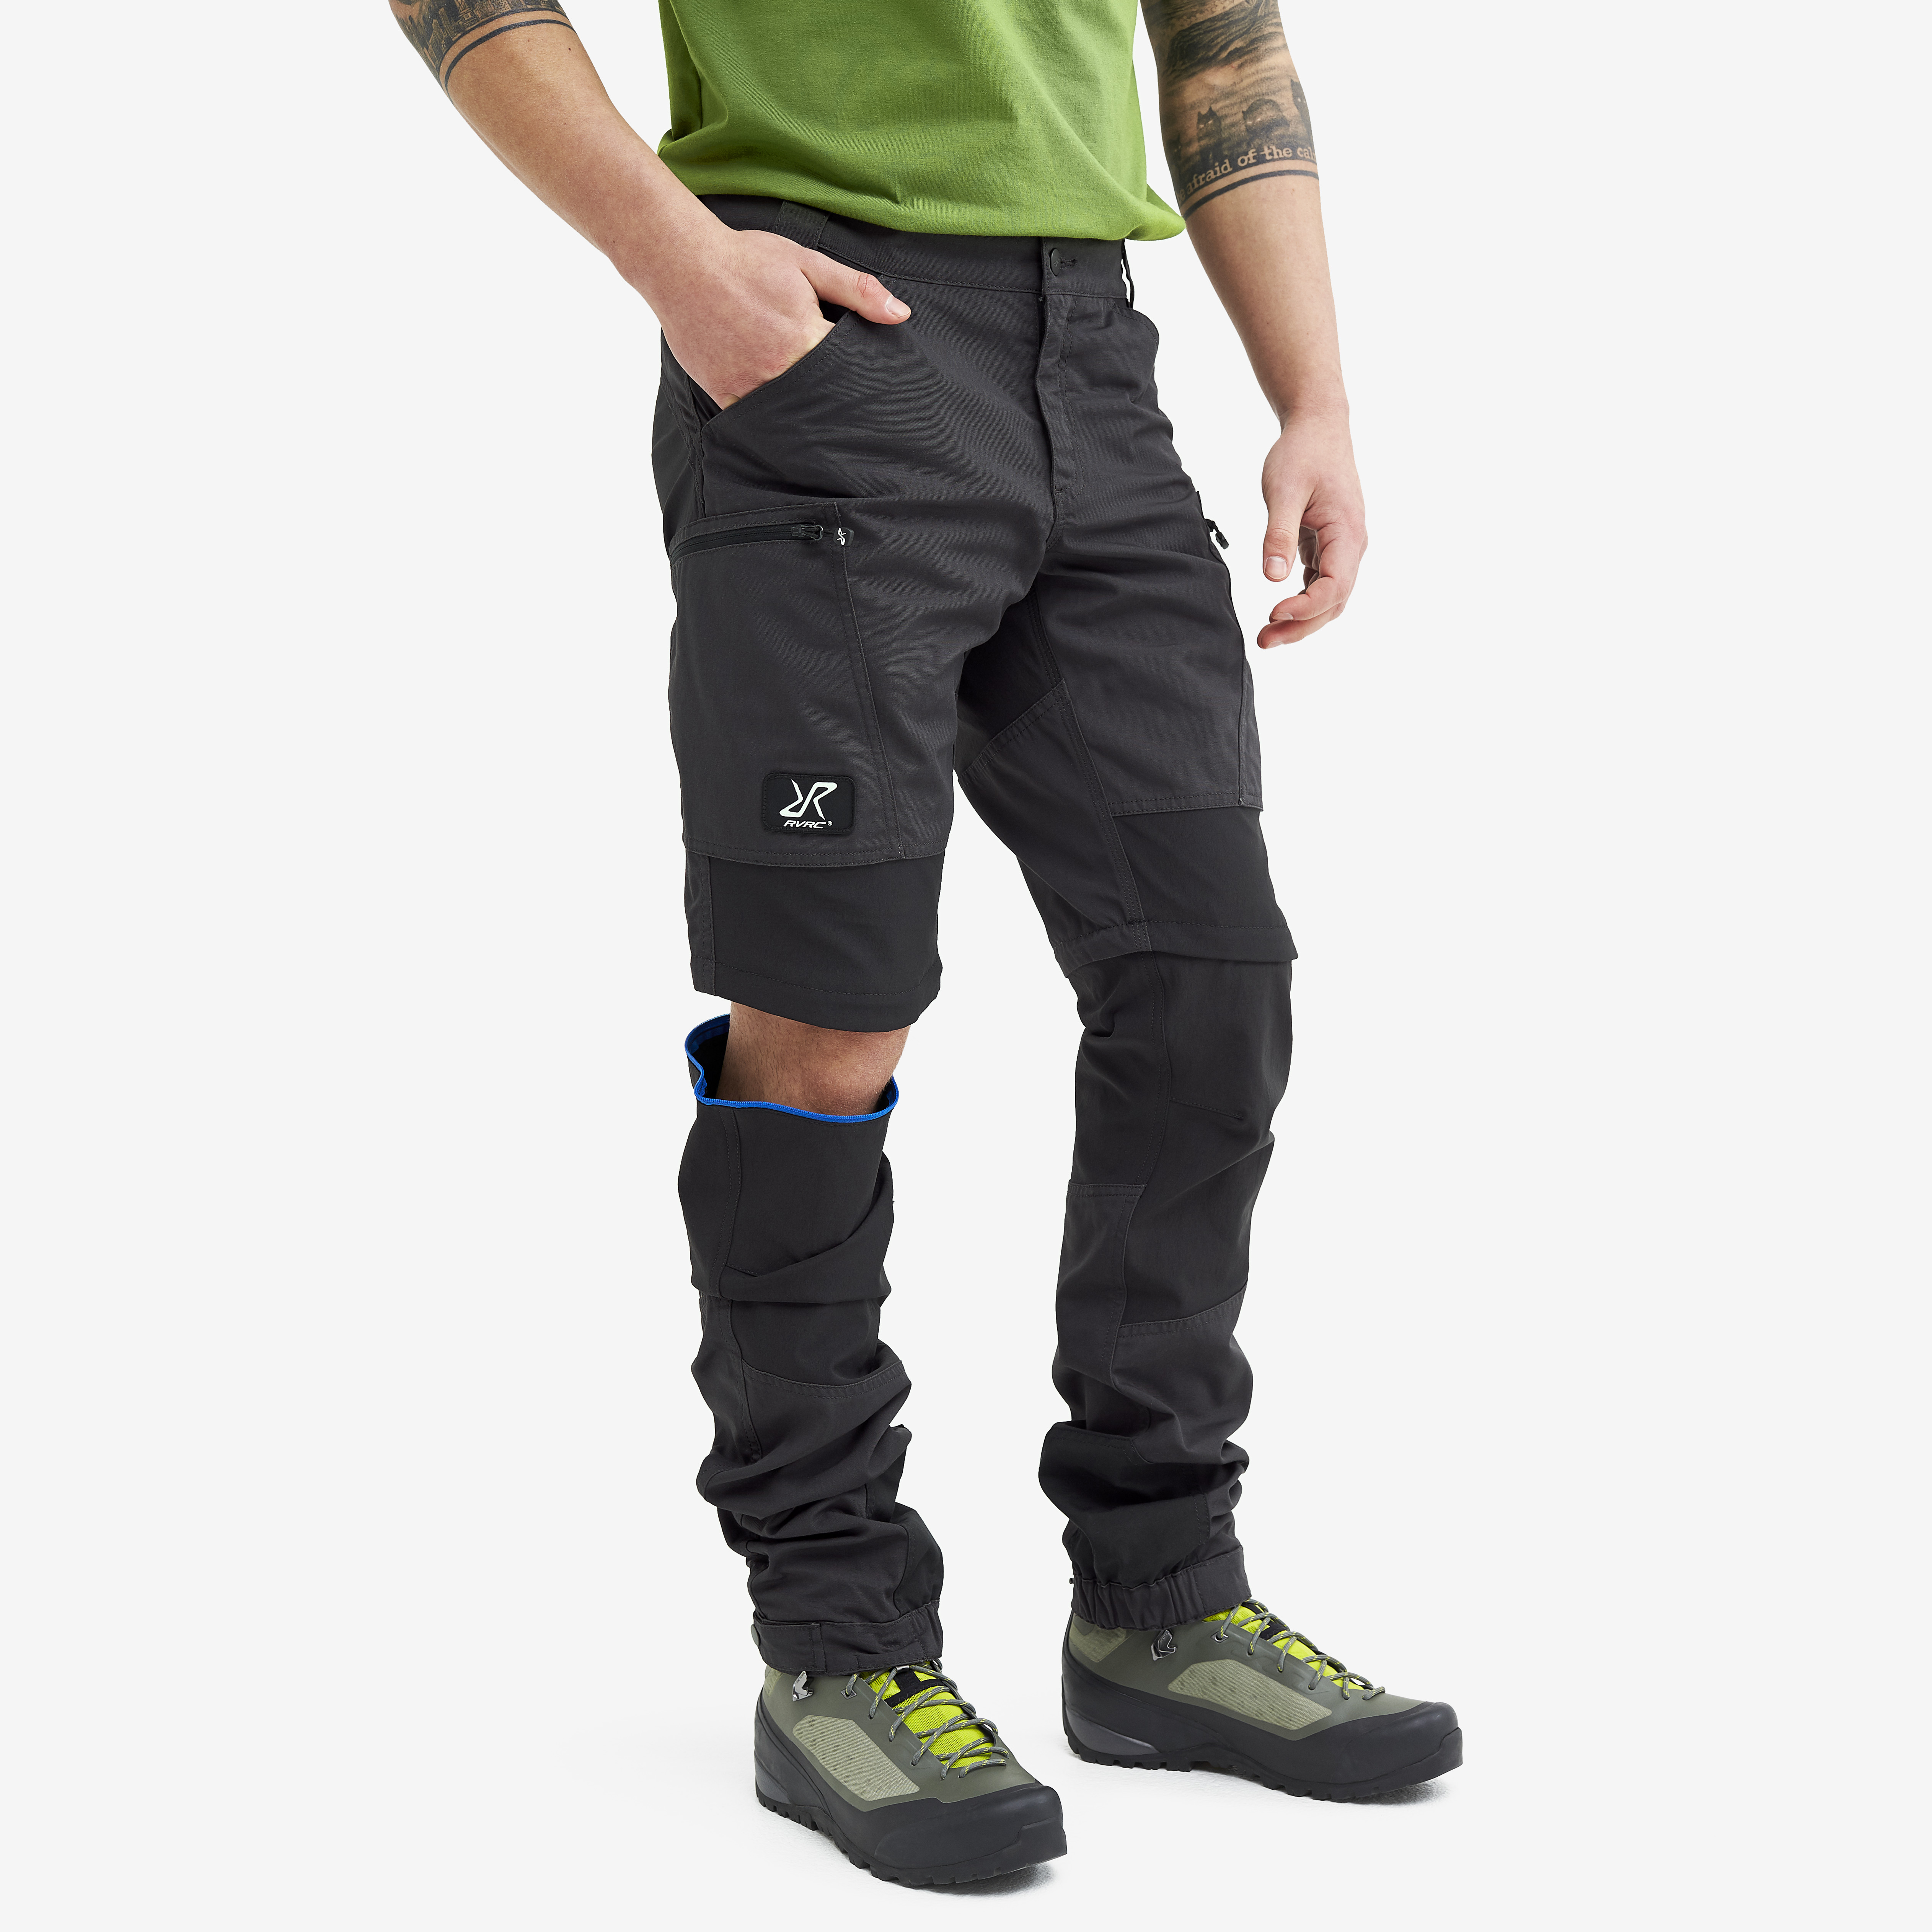 Nordwand Pro Zip-off Pants Anthracite Hombres